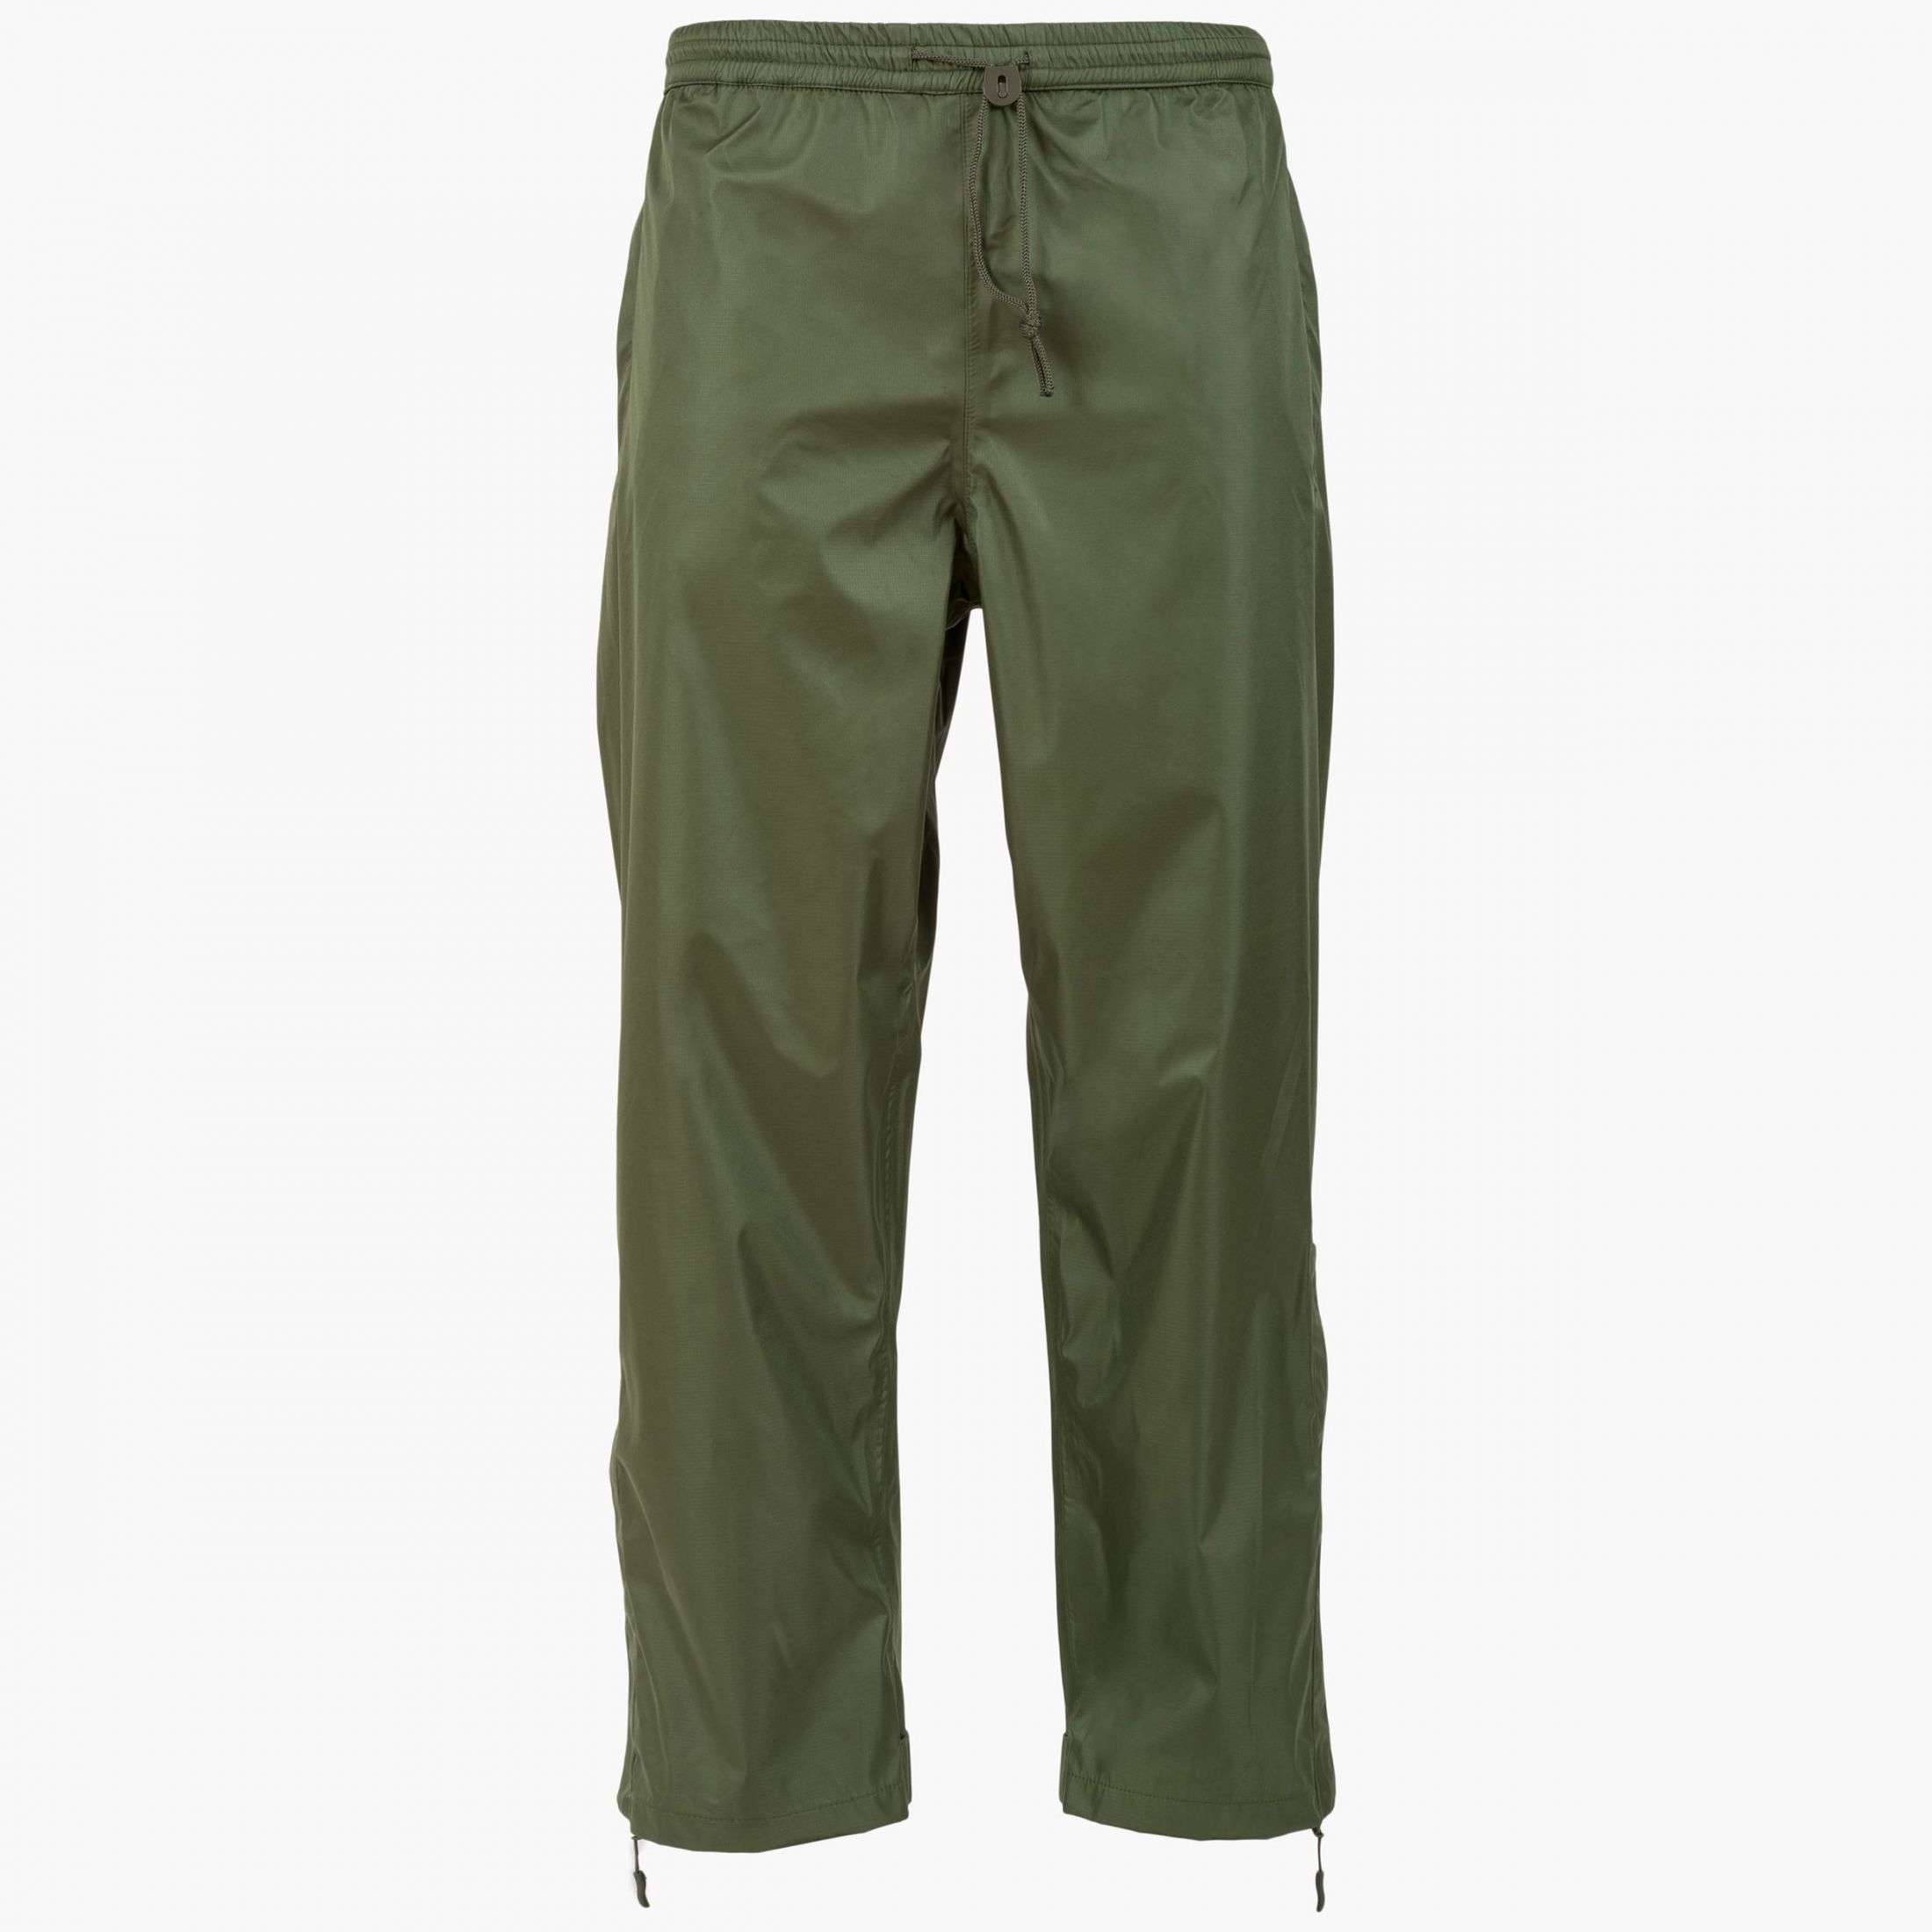 Highlander, Highlander Tempest Rain Trousers, Trousers & Shorts,Wylies Outdoor World,